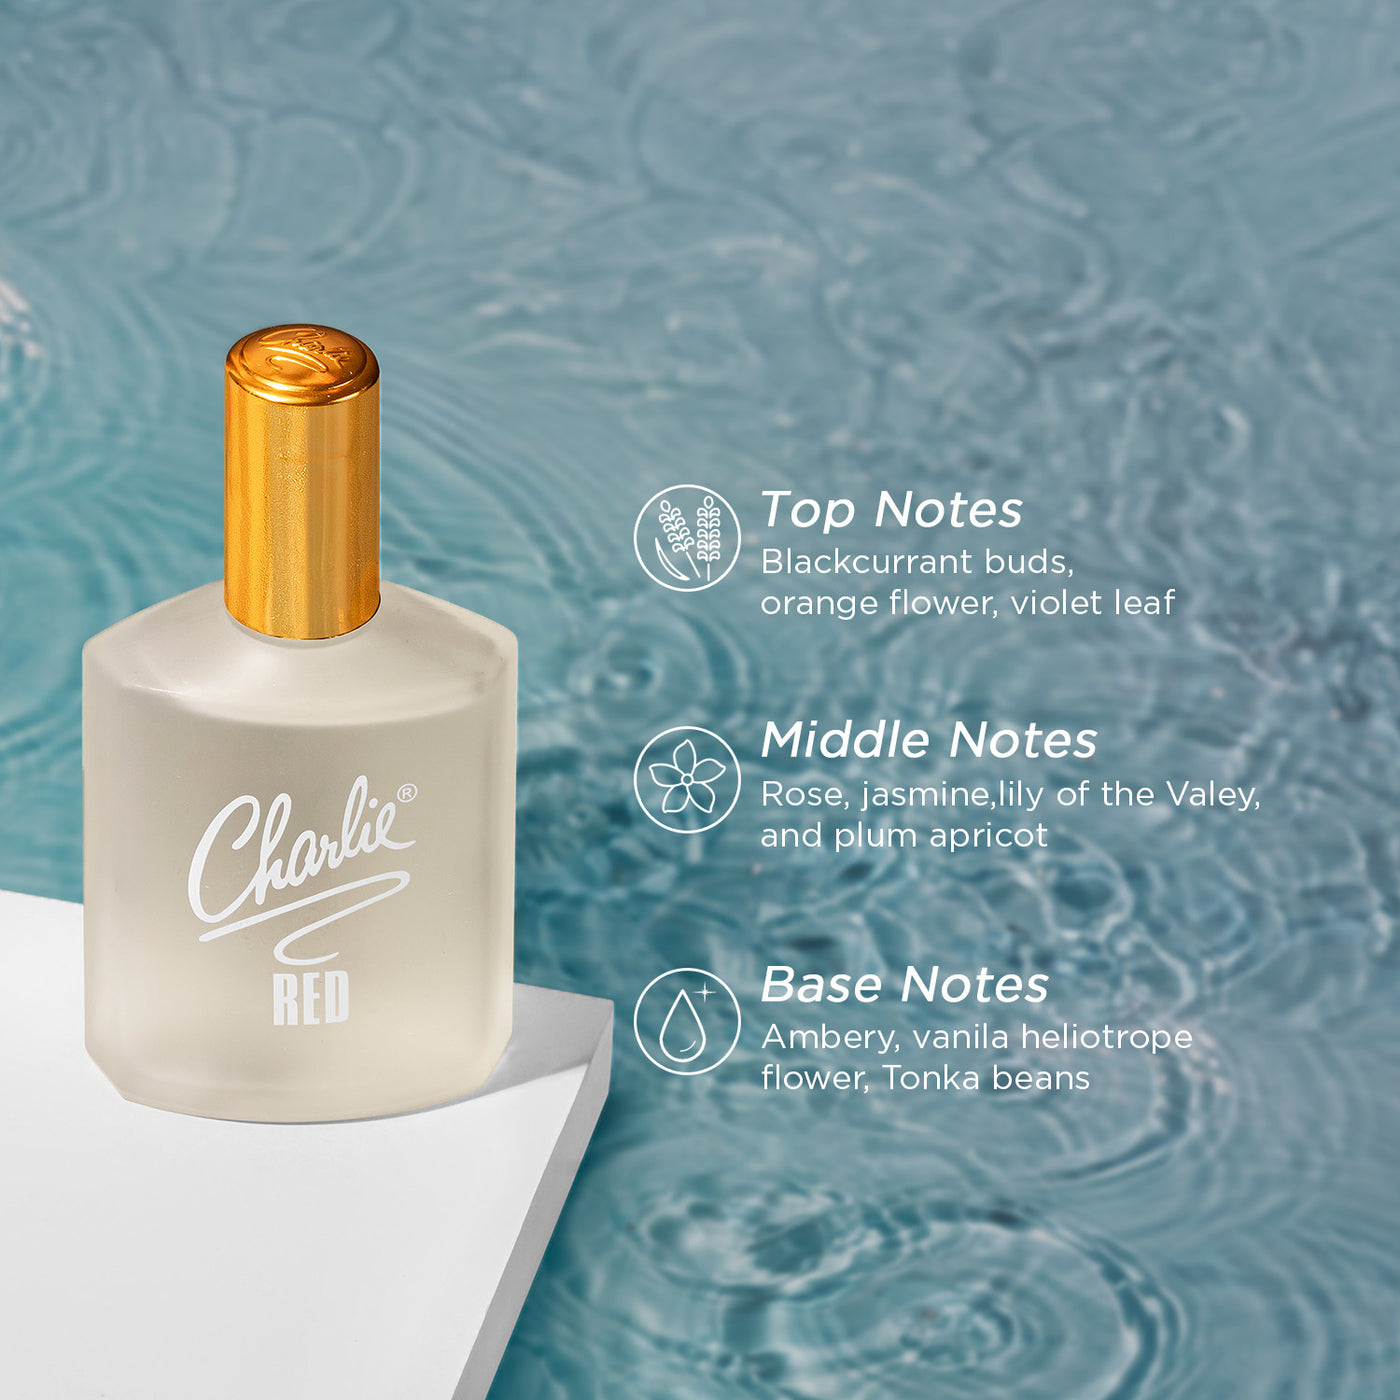 Charlie® Red EDT